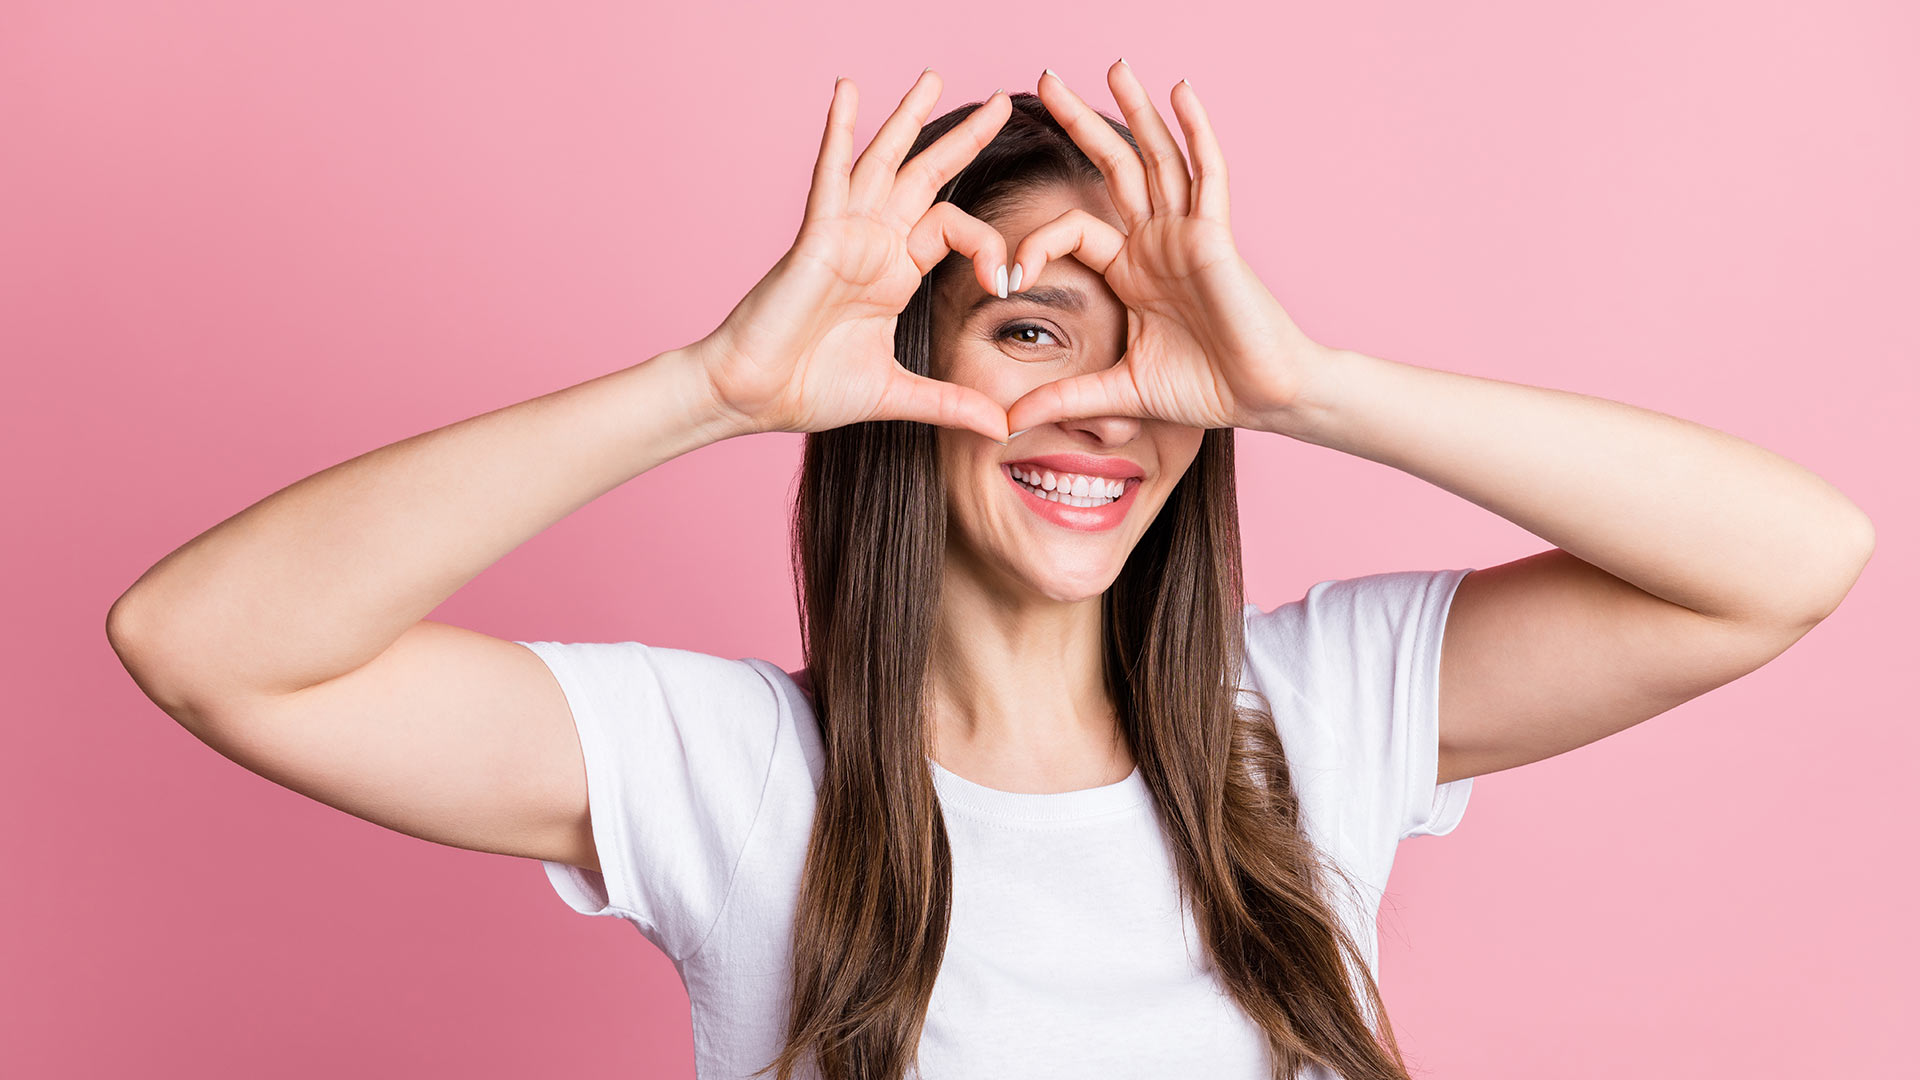 Brunette woman in white t-shirt smiling while making the shape of a love heart with her fingers in front of pink background.